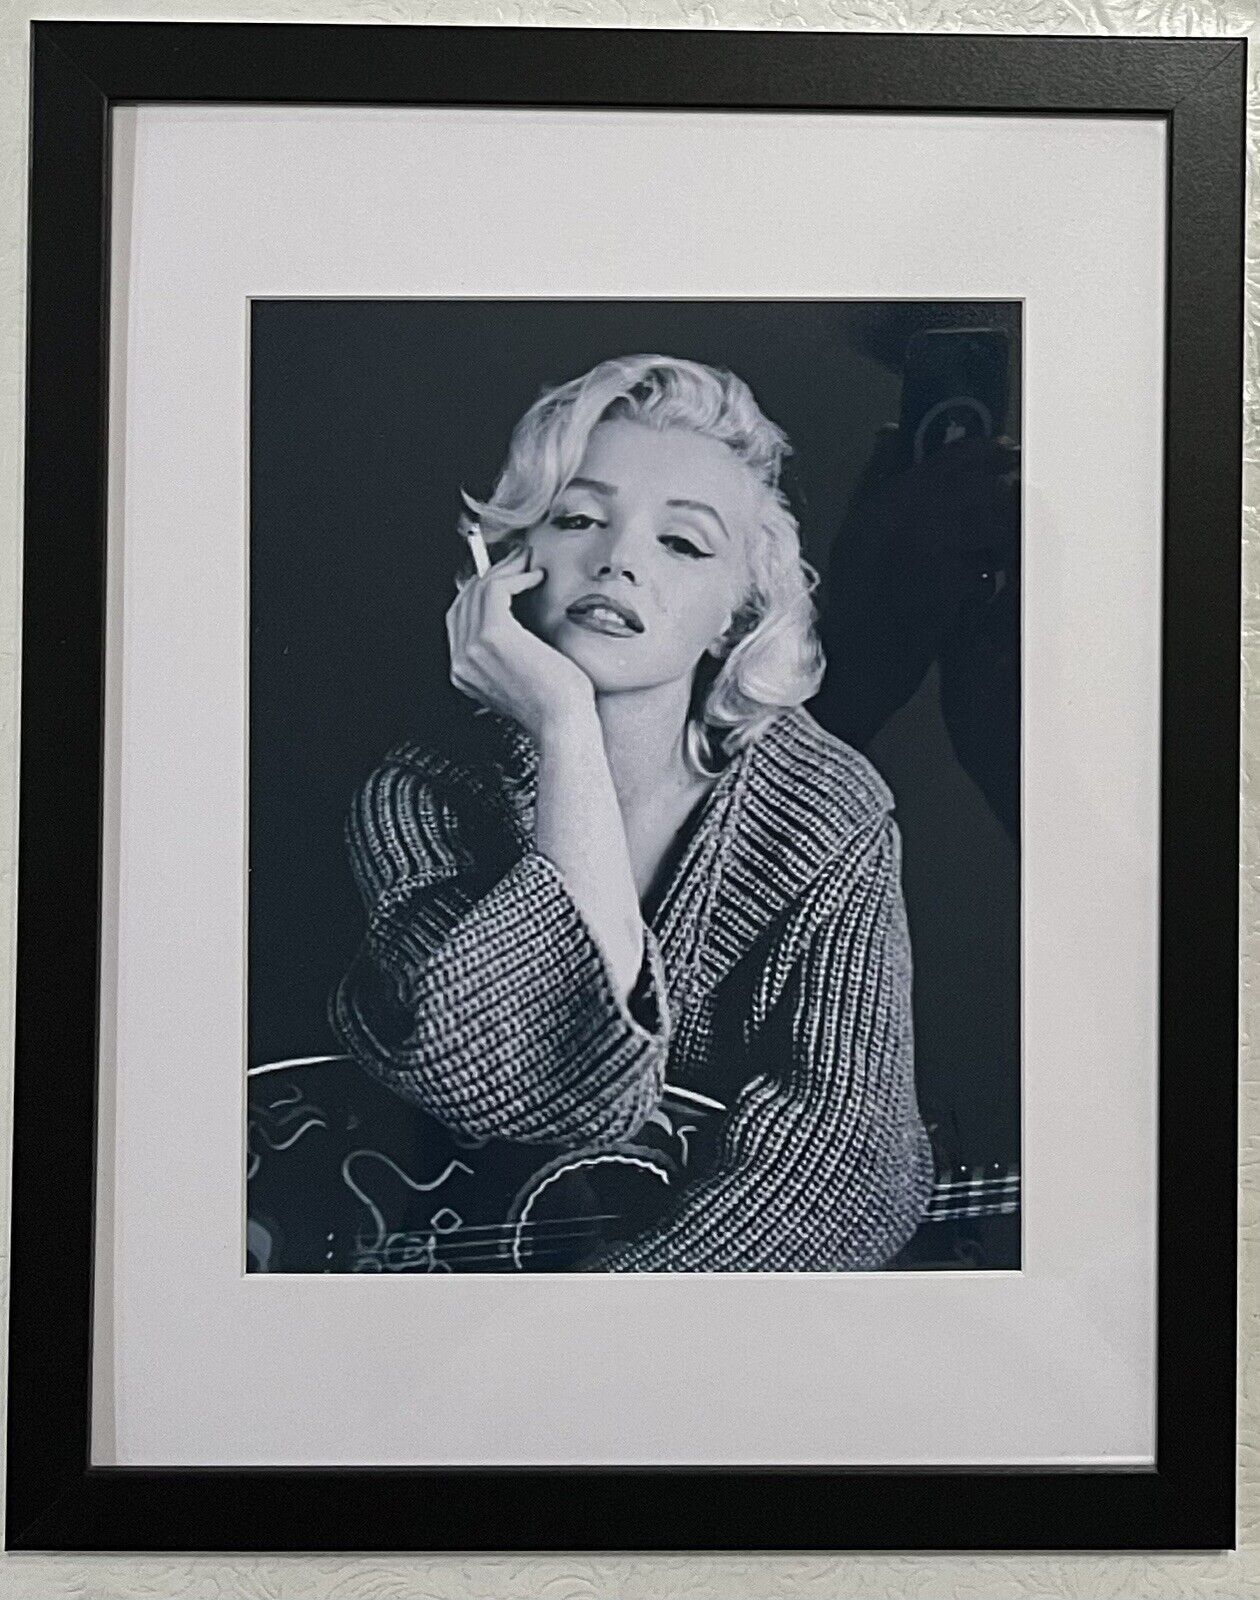 New Framed And Matted 8x10 Color Photo of Hollywood Icon Marilyn Monroe.